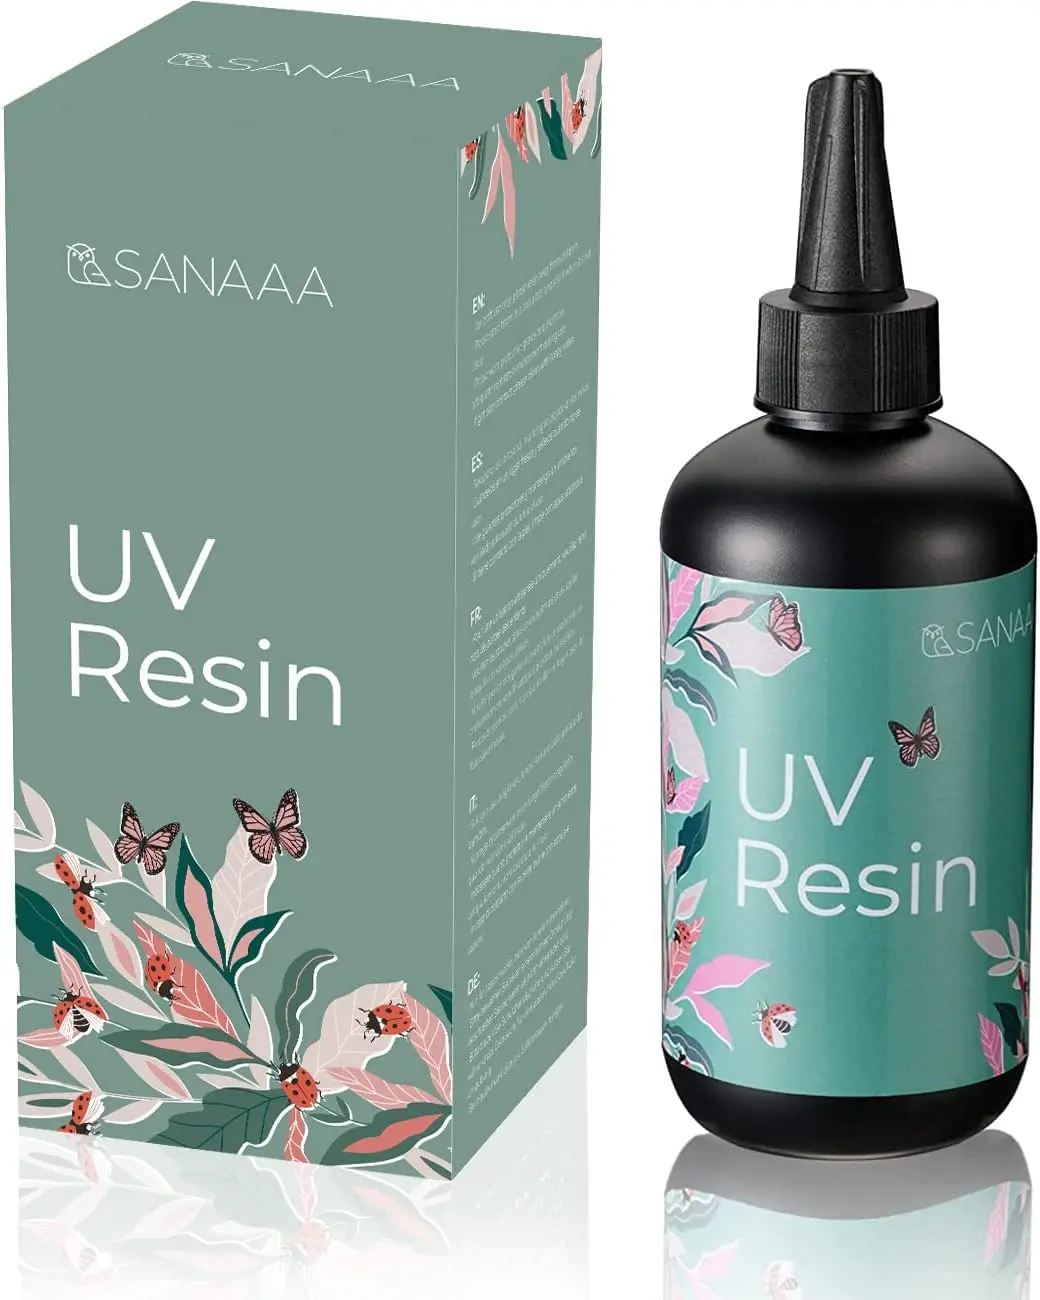 SANAAA UV Resin Clear Hard Type 100g Transparent UV Curing Ultraviolet Cure Resin, Solar Cure Sunlight Activated Resin for DIY Resin Jewelry Making